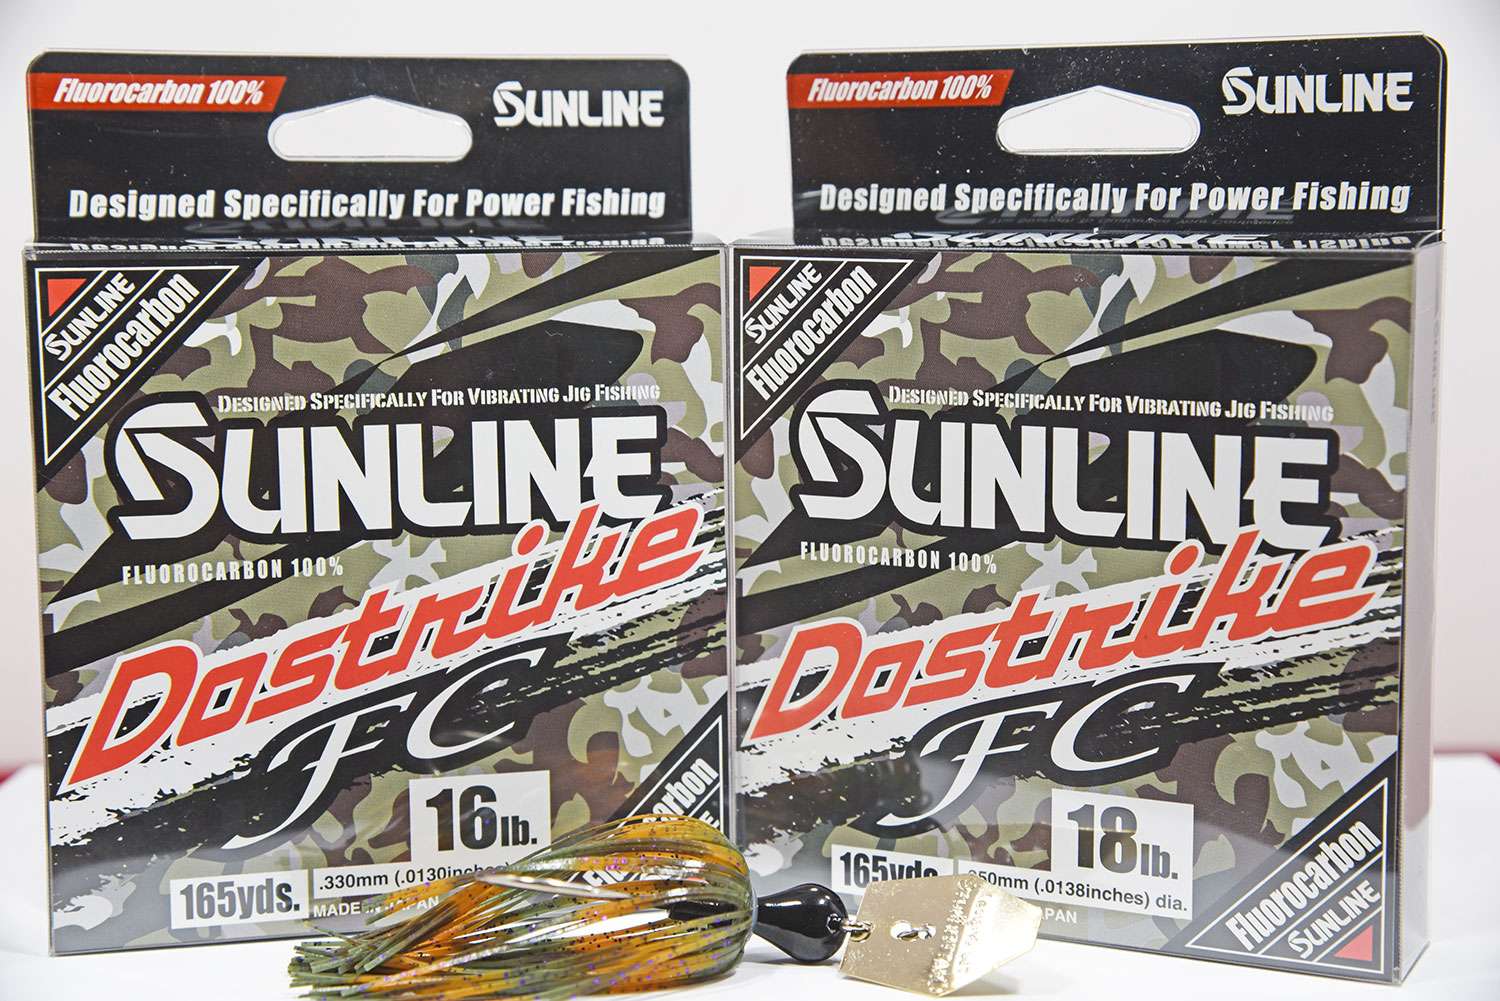 <p><b>Sunline Dostrike FC</b></p>
Sunline is introducing one of its newest line options called Dostrike FC. This is a 100% fluorocarbon line that has all the characteristics just like other Sunline FC line choices higher abrasion resistance, lower stretch factor, and greater sensitivity, but Dostrike FC is designed specifically for use with vibrating jigs. Dostrike FC is made to give vibrating jig fishermen the perfect balance of stretch and strength to insure maximum hooking ratio. Dostrike FC is made with repeating color sections of 12-inch green, followed by 10-inch section of smoke coloring. The line will be available in the following line sizes 14-, 16-, 18-, and 20-pound line size and comes in 165-yard spools.<br>
<p><b>MSRP: $33.99-$35.99</b></p>
<a href=